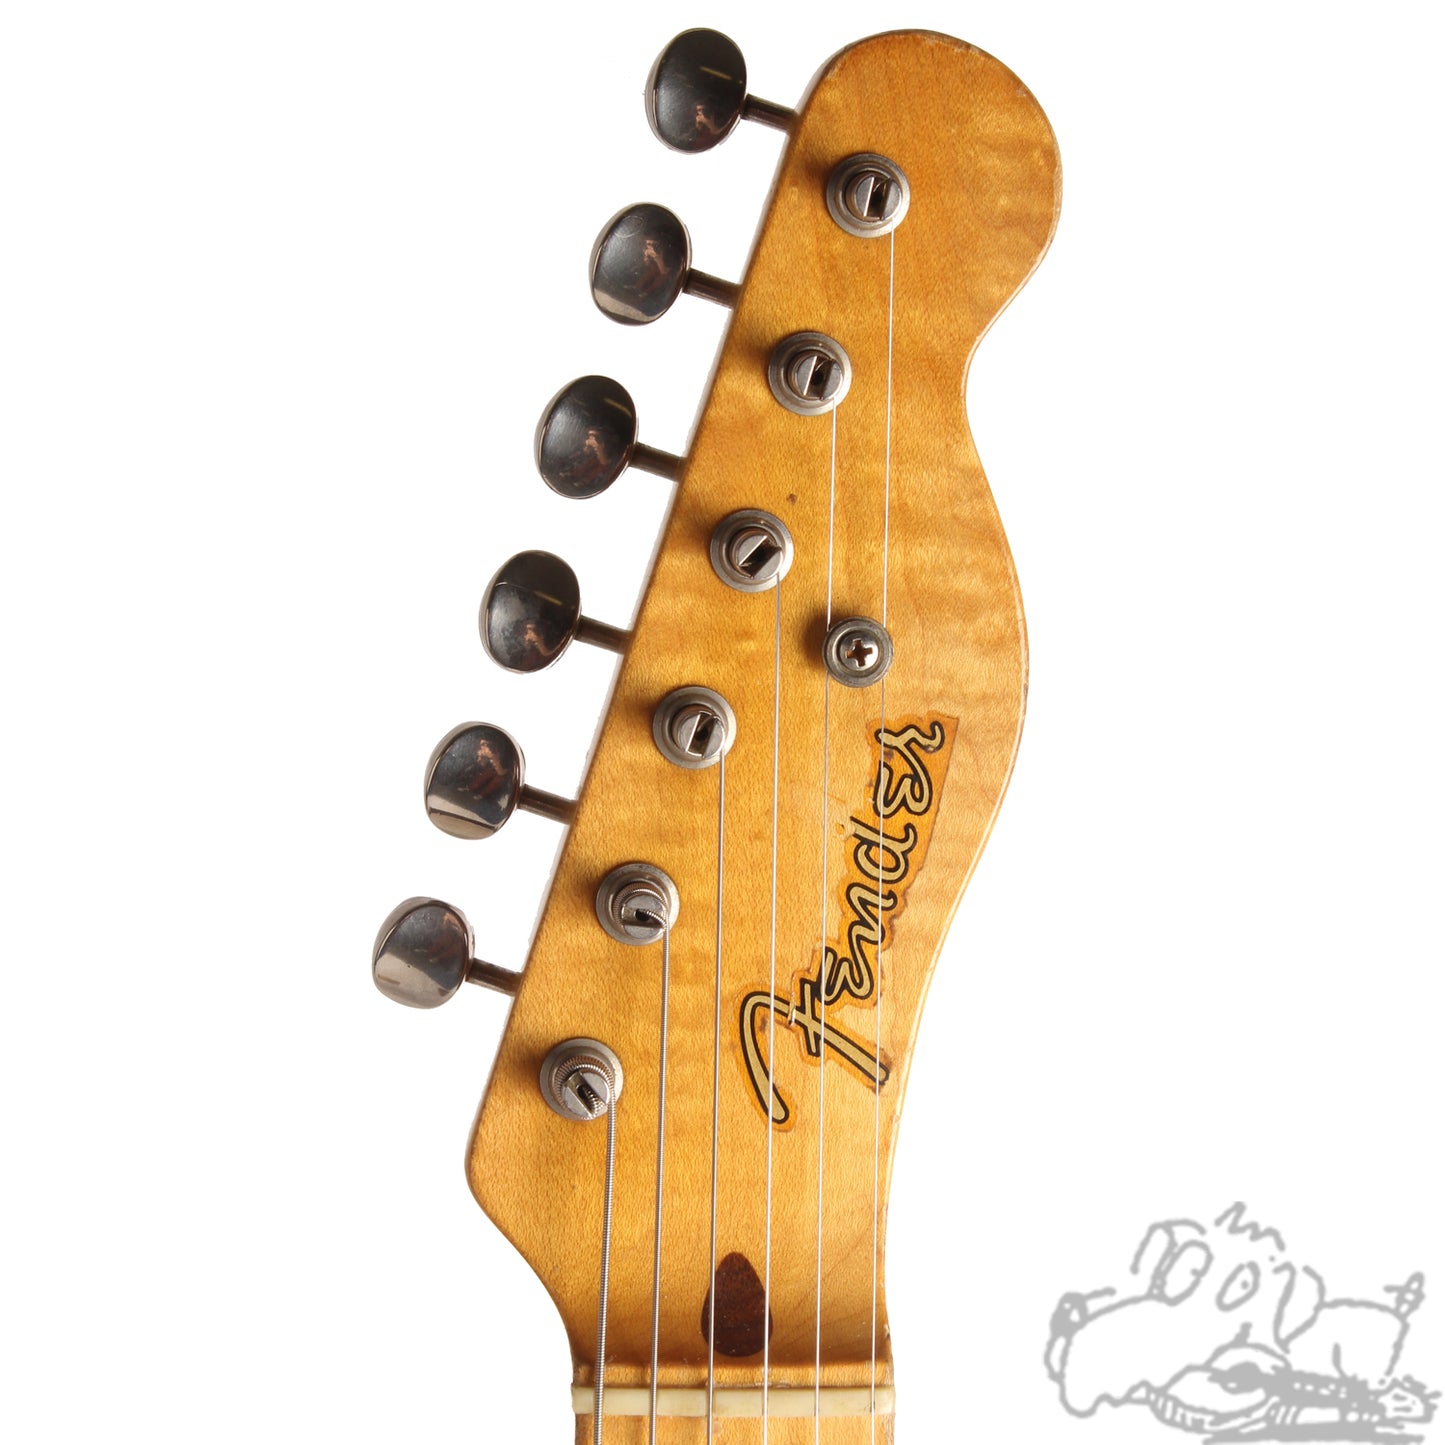 1997 Fender Custom Shop Nocaster Relic by Vince Cunetto